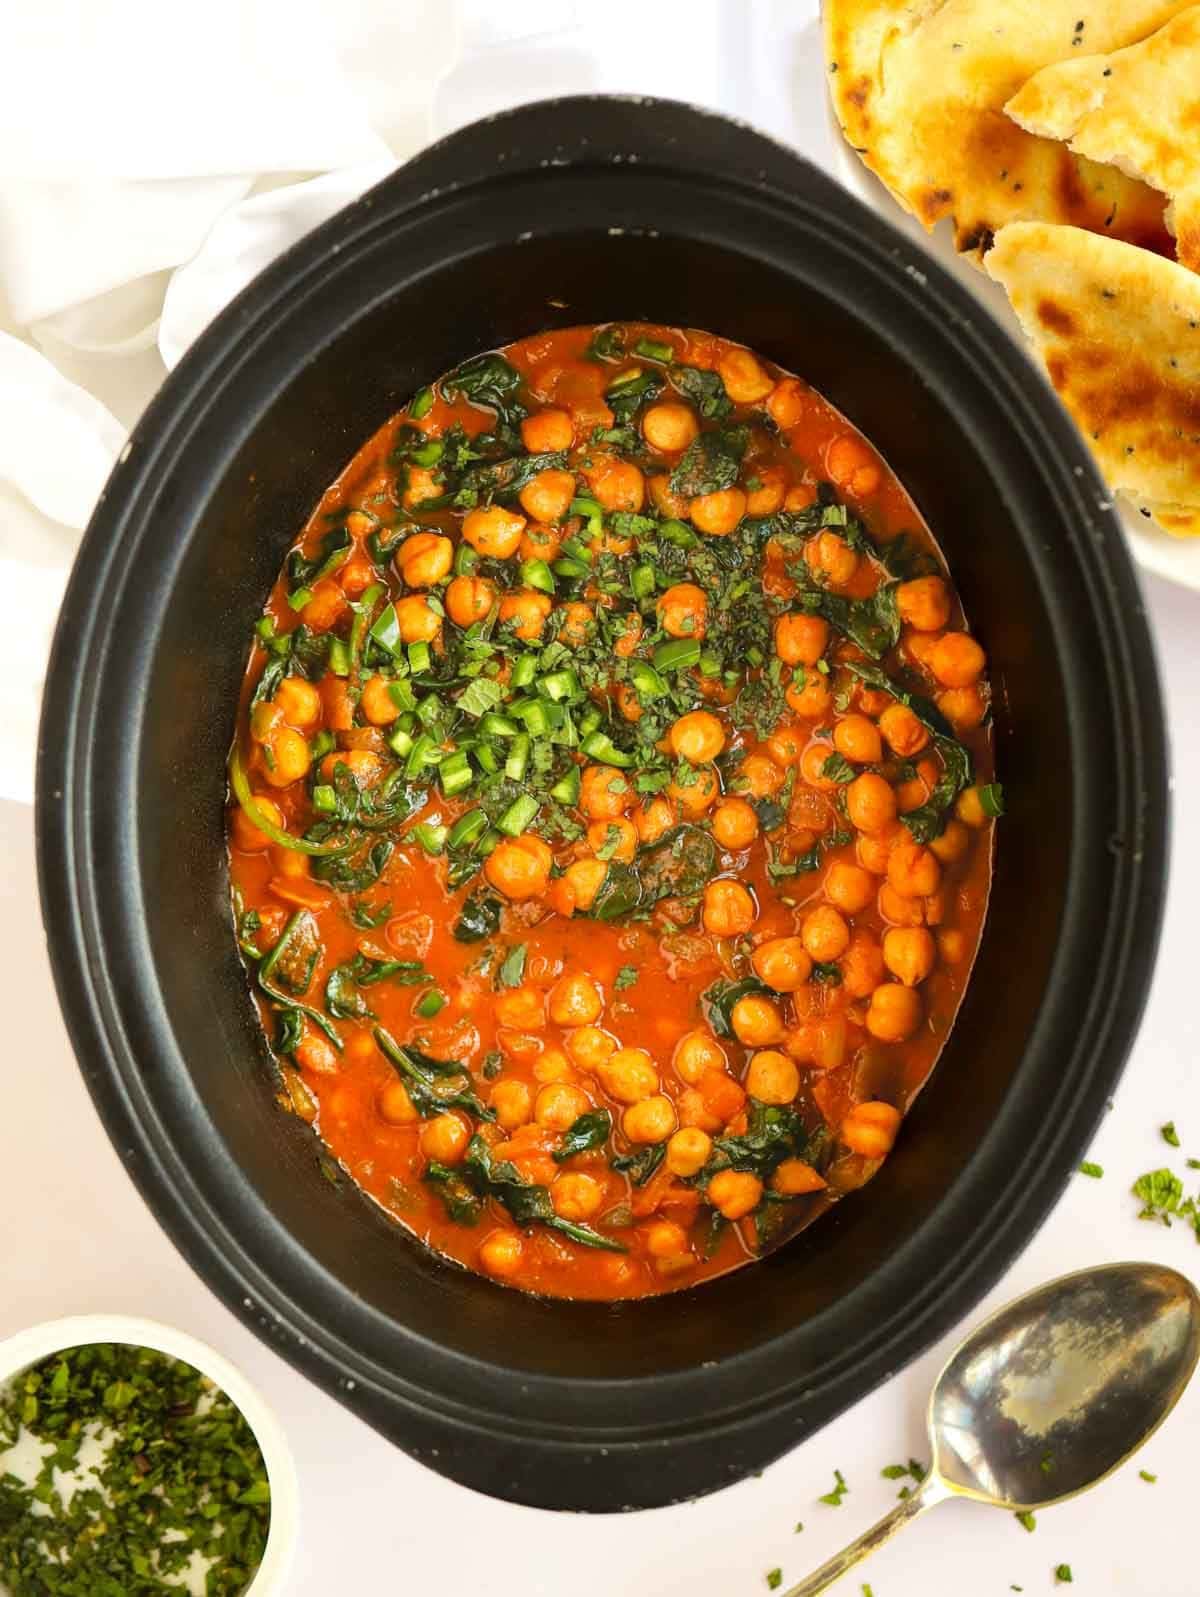 Slow cooker pan filled with chickpeas and spinach.